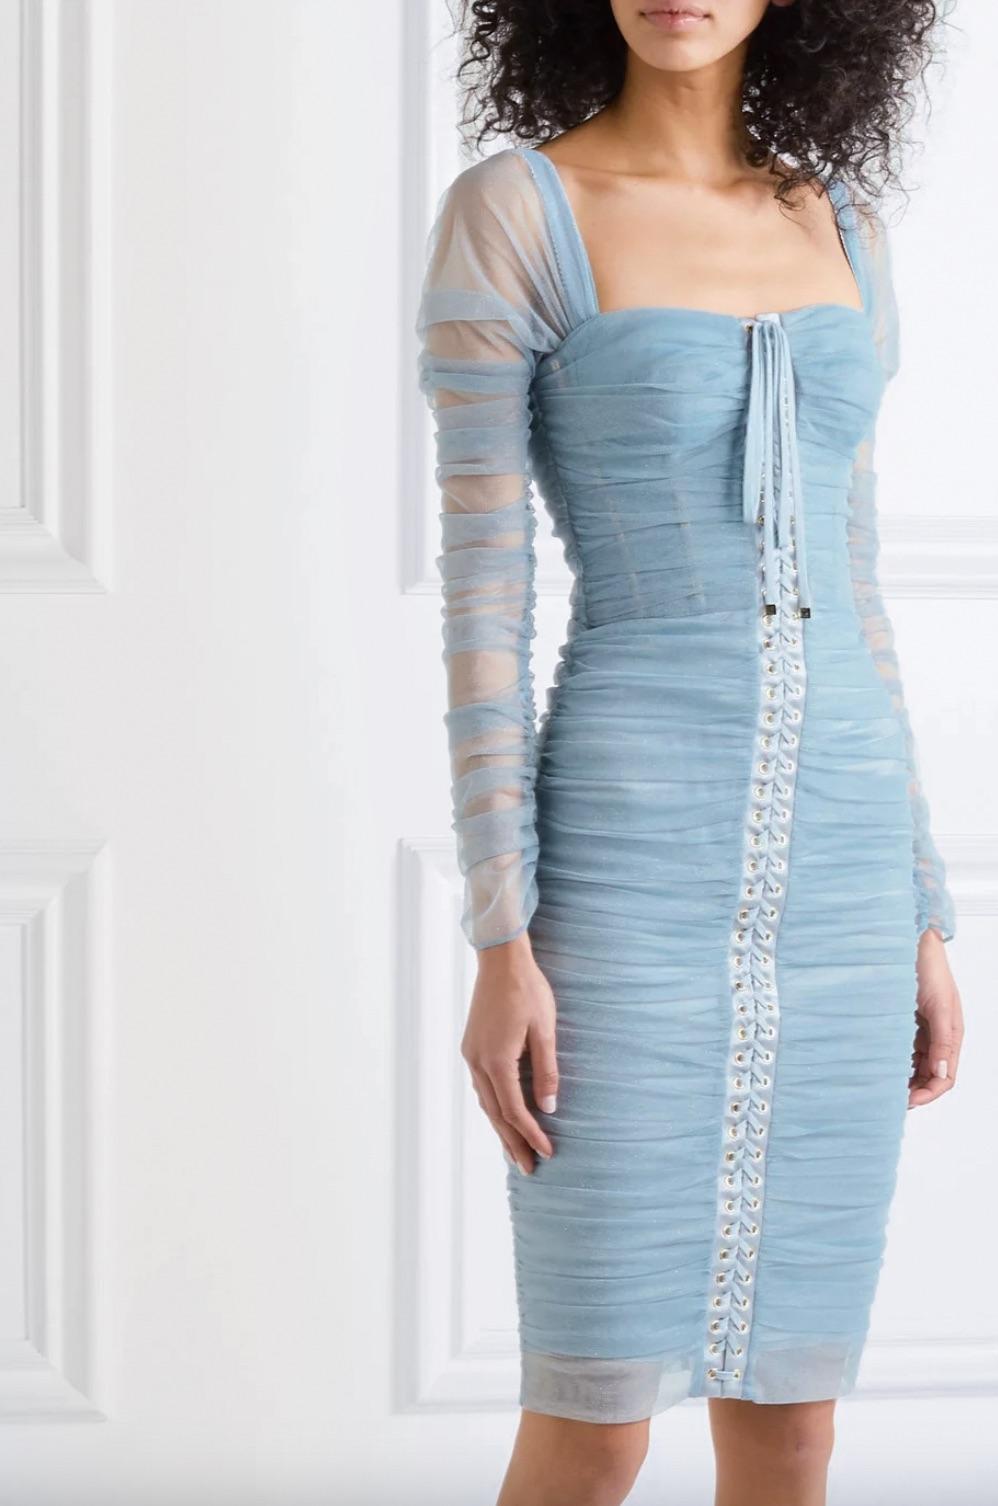 The lace-up tulle bustier dress by Dolce & Gabbana is a stunning piece crafted in Italy. It is made of sheer blue tulle and features a sweetheart neckline, long sleeves, and a knee-length fitted silhouette. The dress has a feminine ruched effect